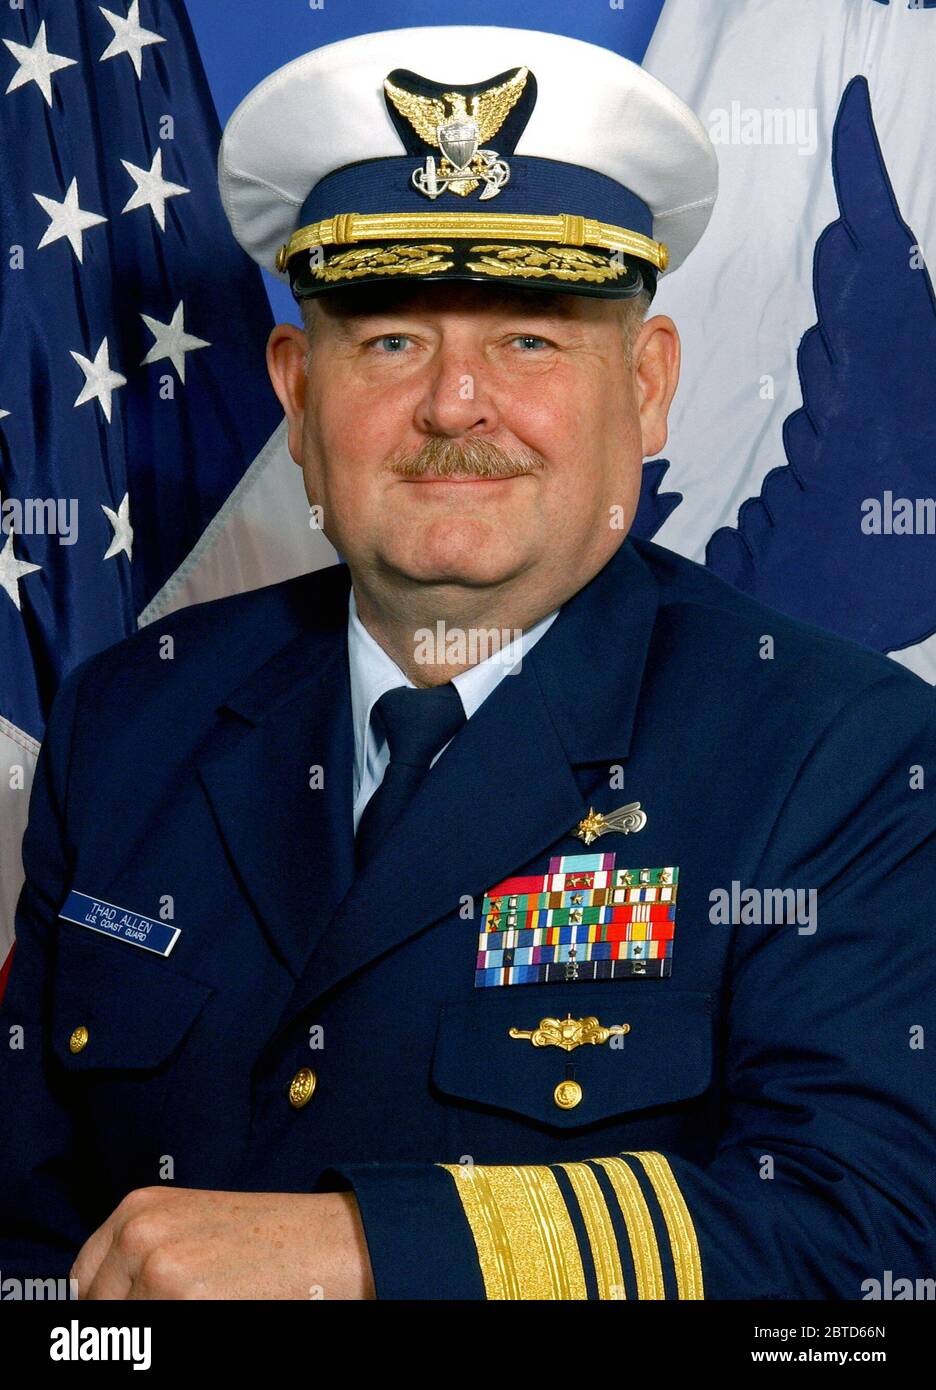 WASHINGTON, D.C. (May 25, 2006)--Admiral Thad W. Allen assumed the duties of the 23rd Commandant of the U.S. Coast Guard on May 25th, 2006. Admiral Allen is a native of Tucson, Arizona and graduated from the U.S. Coast Guard Academy in 1971. Stock Photo